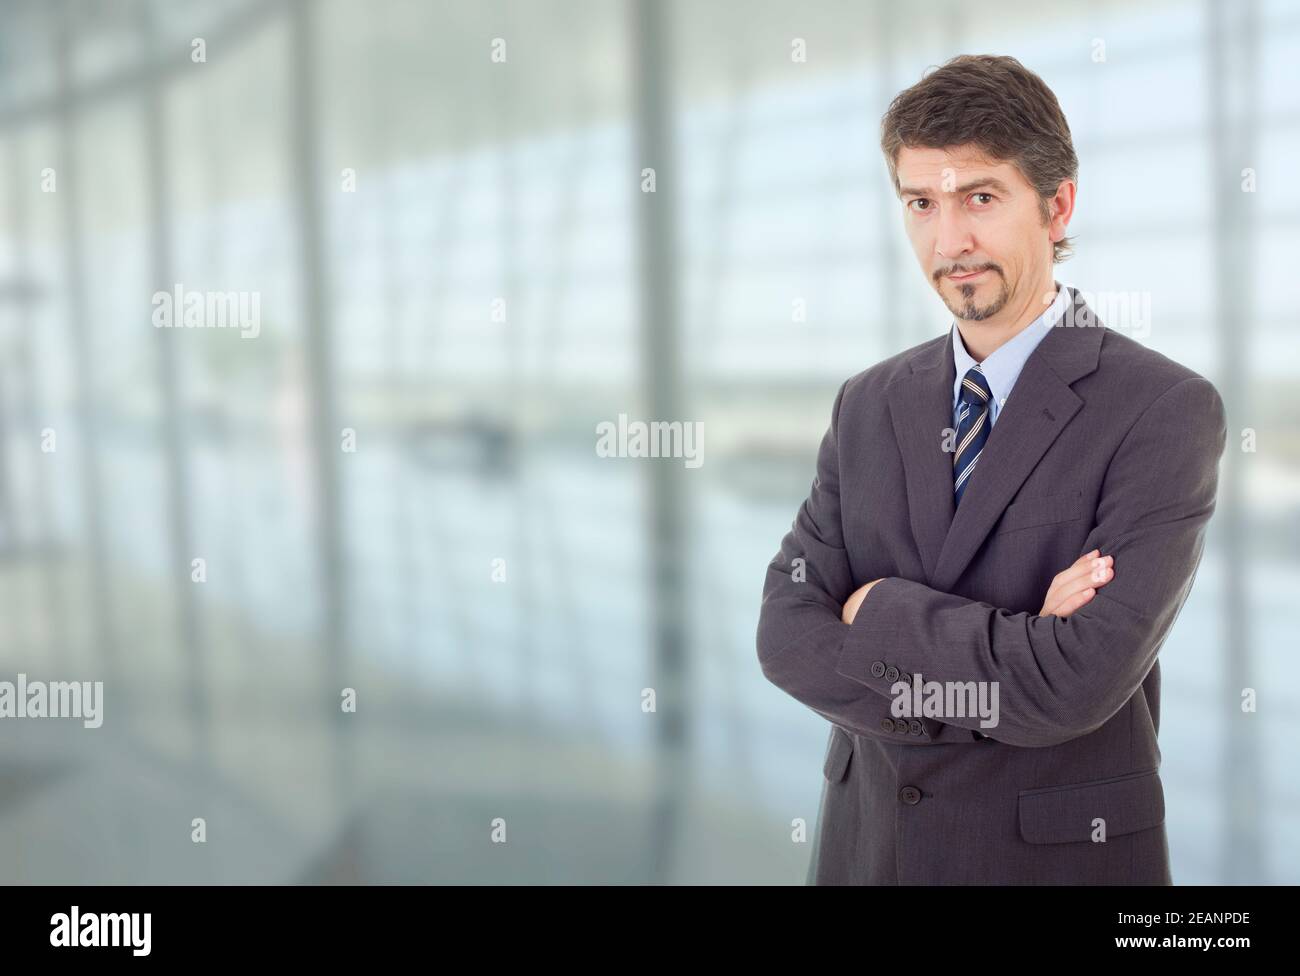 business man at the office Stock Photo